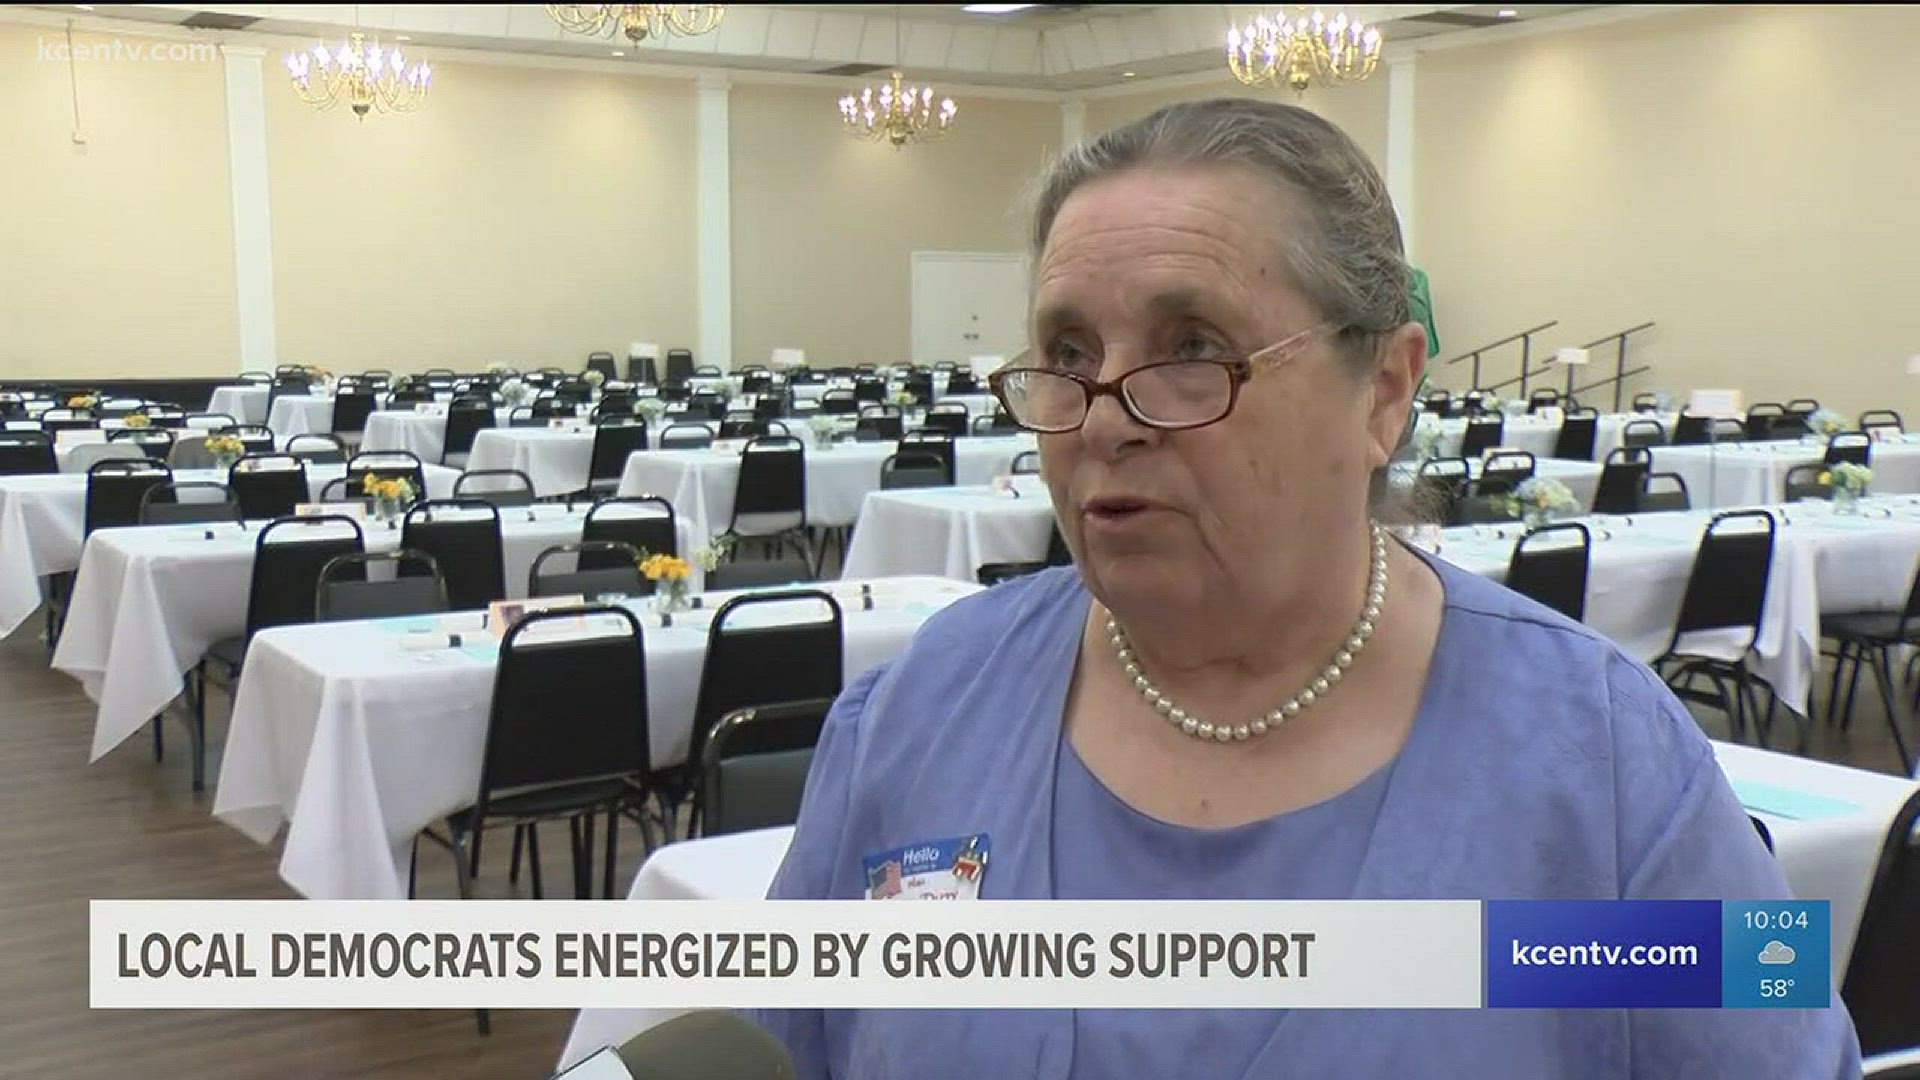 Local democrats energized by growing support